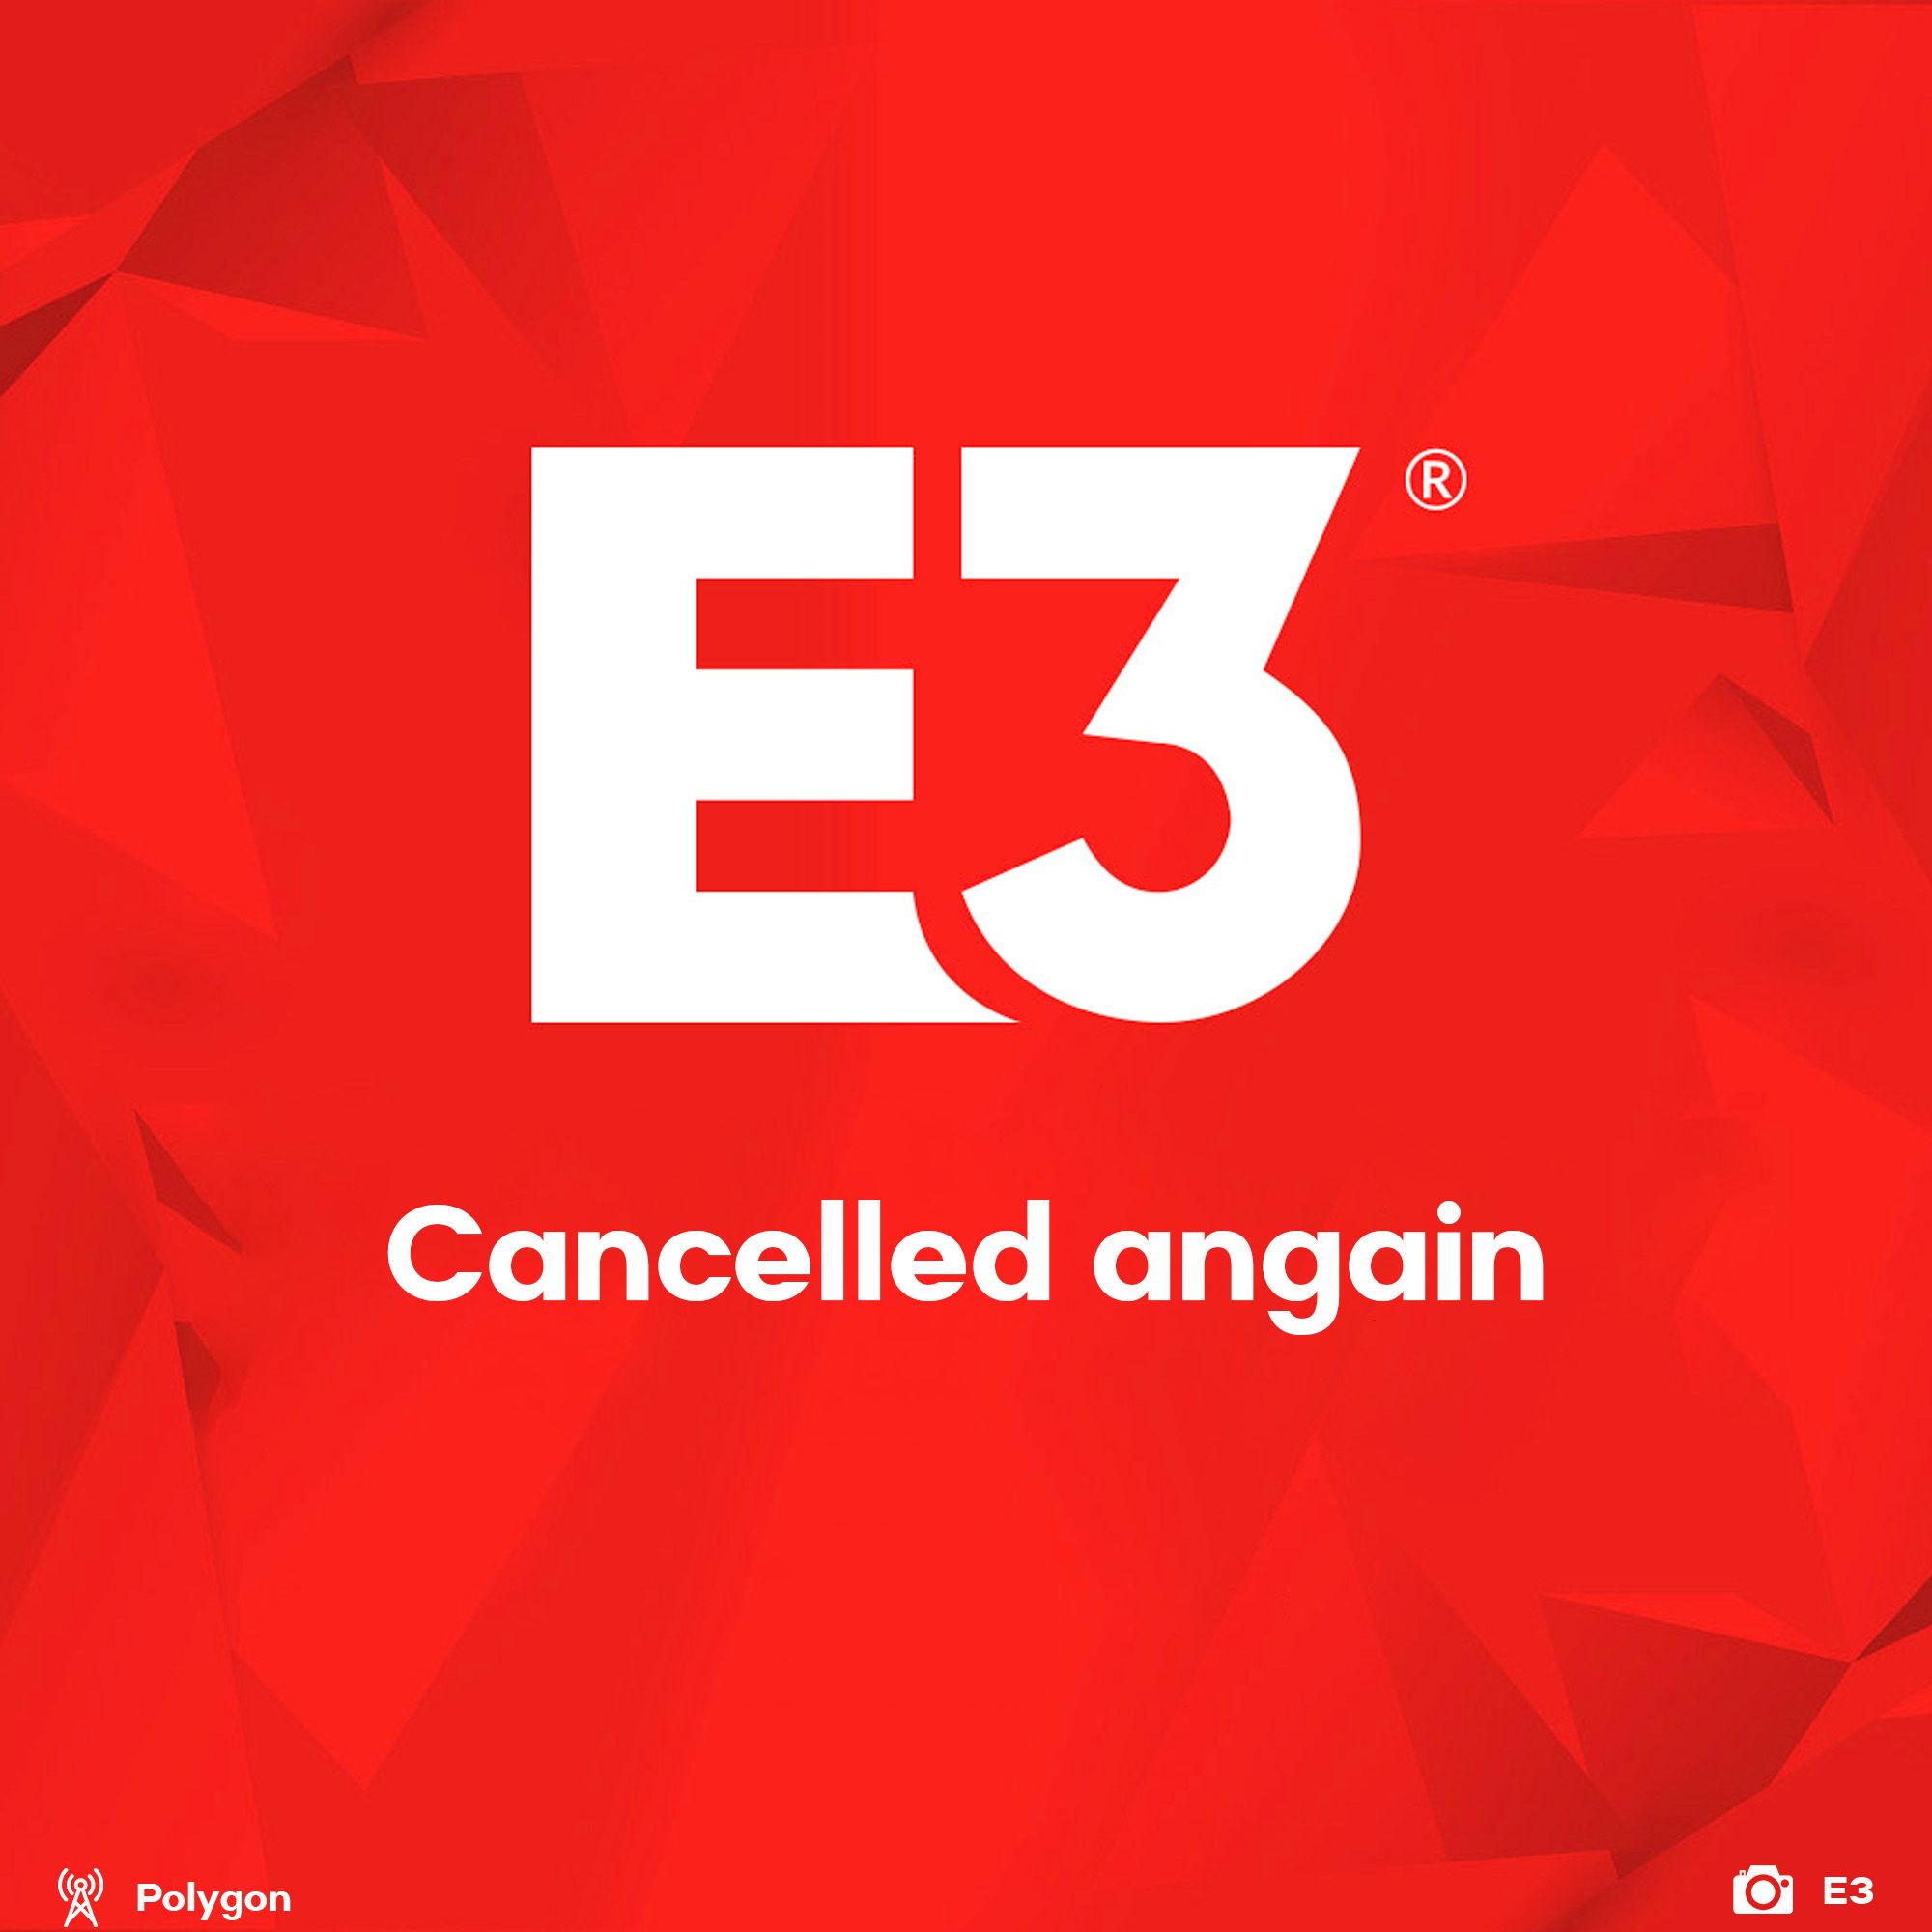 E3 2023 is cancelled